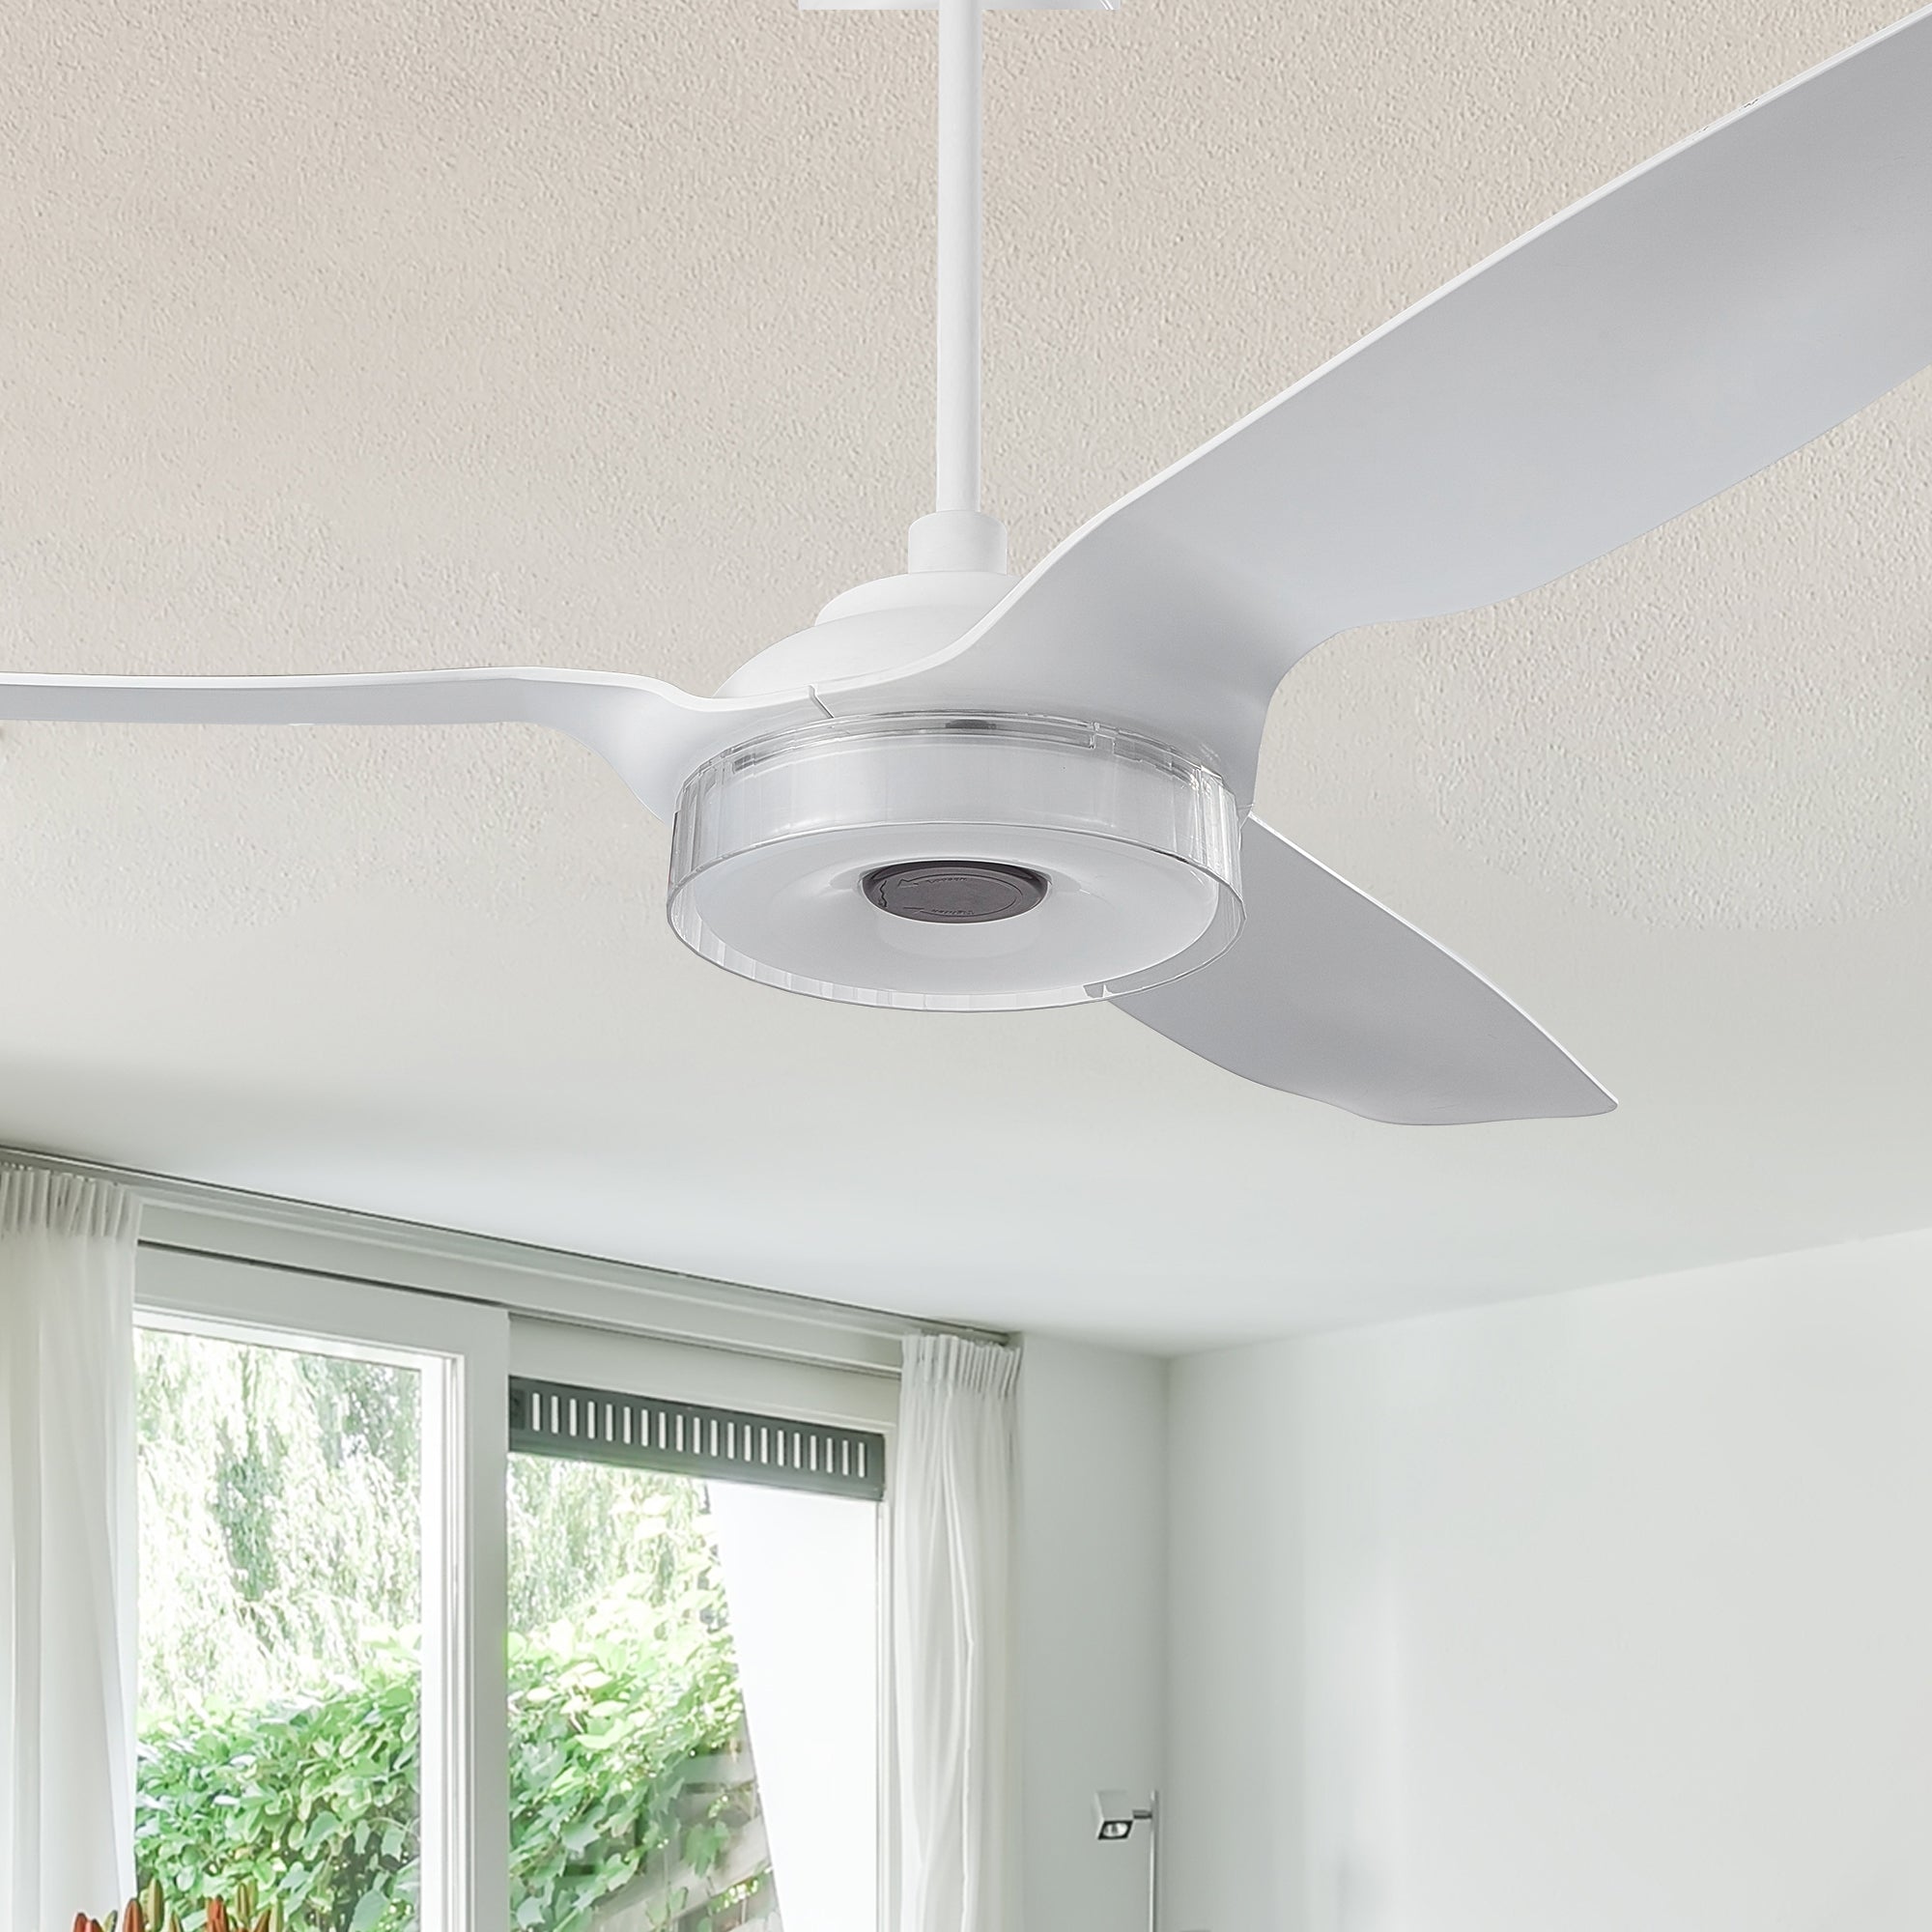 The Smafan Icebreaker 60&#39;&#39; Outdoor smart fan delivers high and energy-efficient airflow in a sleek design. With dimmable integrated LED, 10-Speed whisper-quiet DC motor, available remote, phone app, and voice integration control, and airfoils in classic white, Icebreaker helps you enjoy your better life.